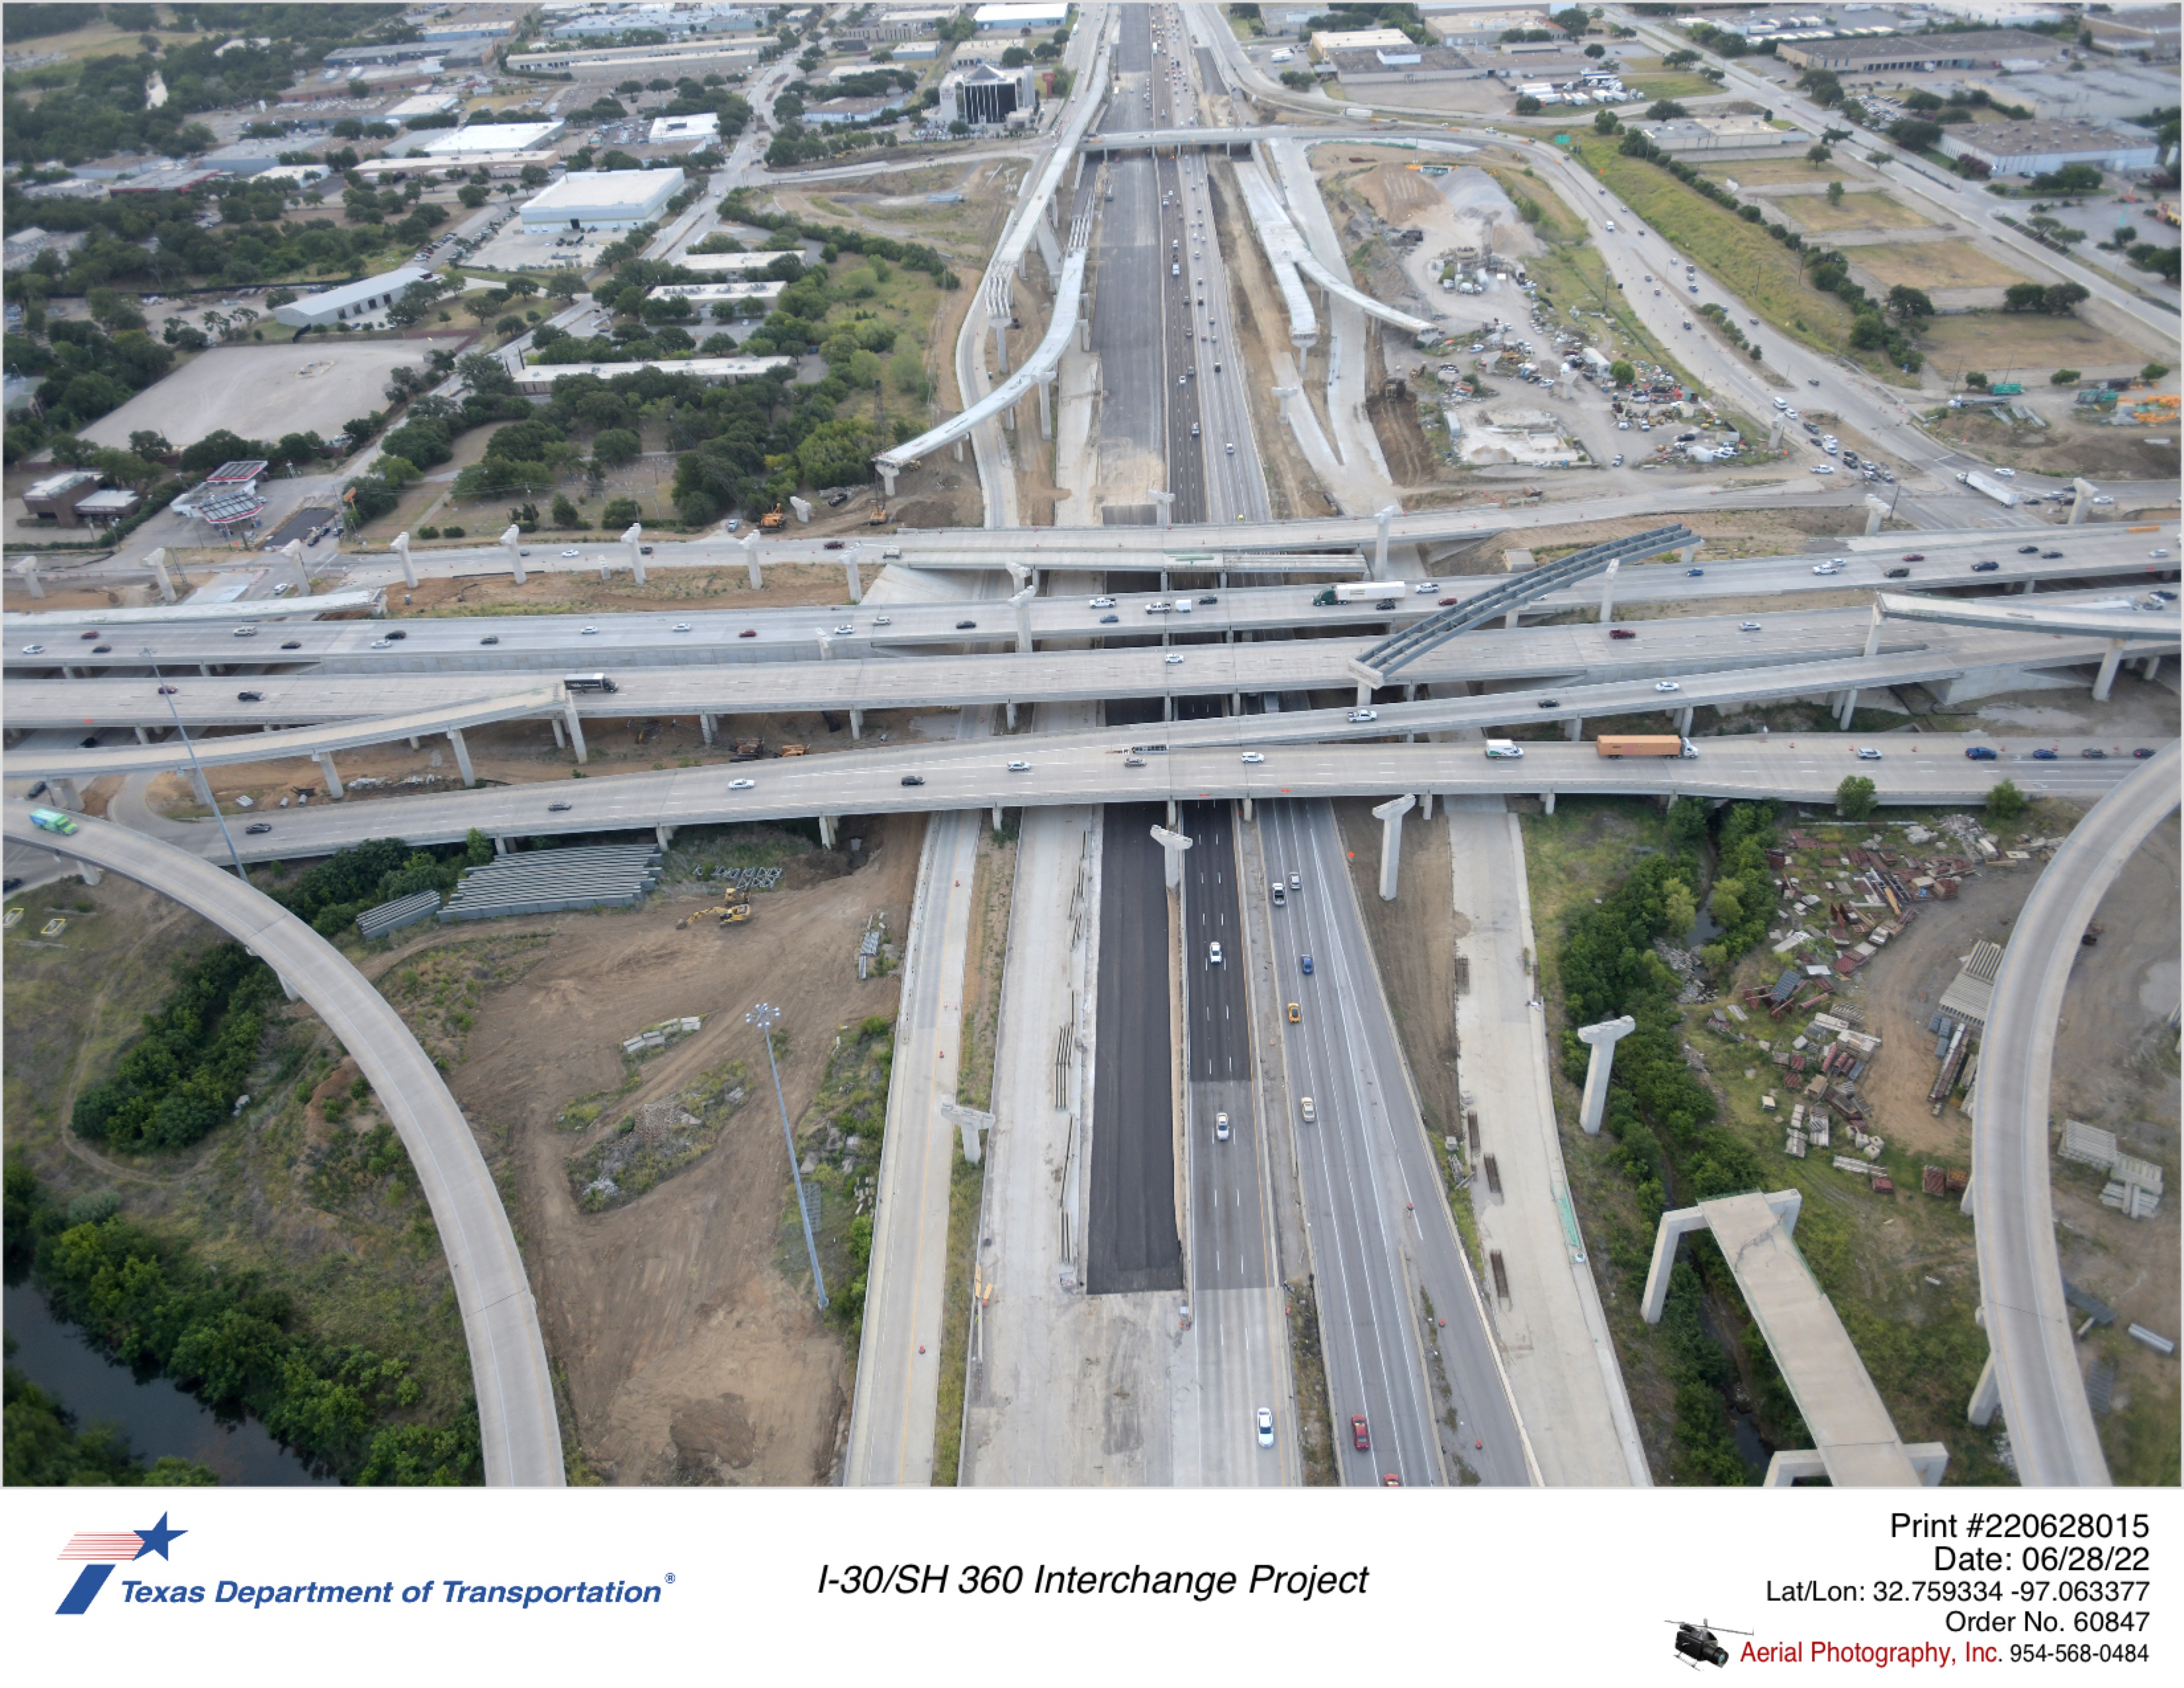 I-30/SH 360 interchange looking east. Image shows partially built direct connectors and construction of I-30 westbound permanent mainlanes.